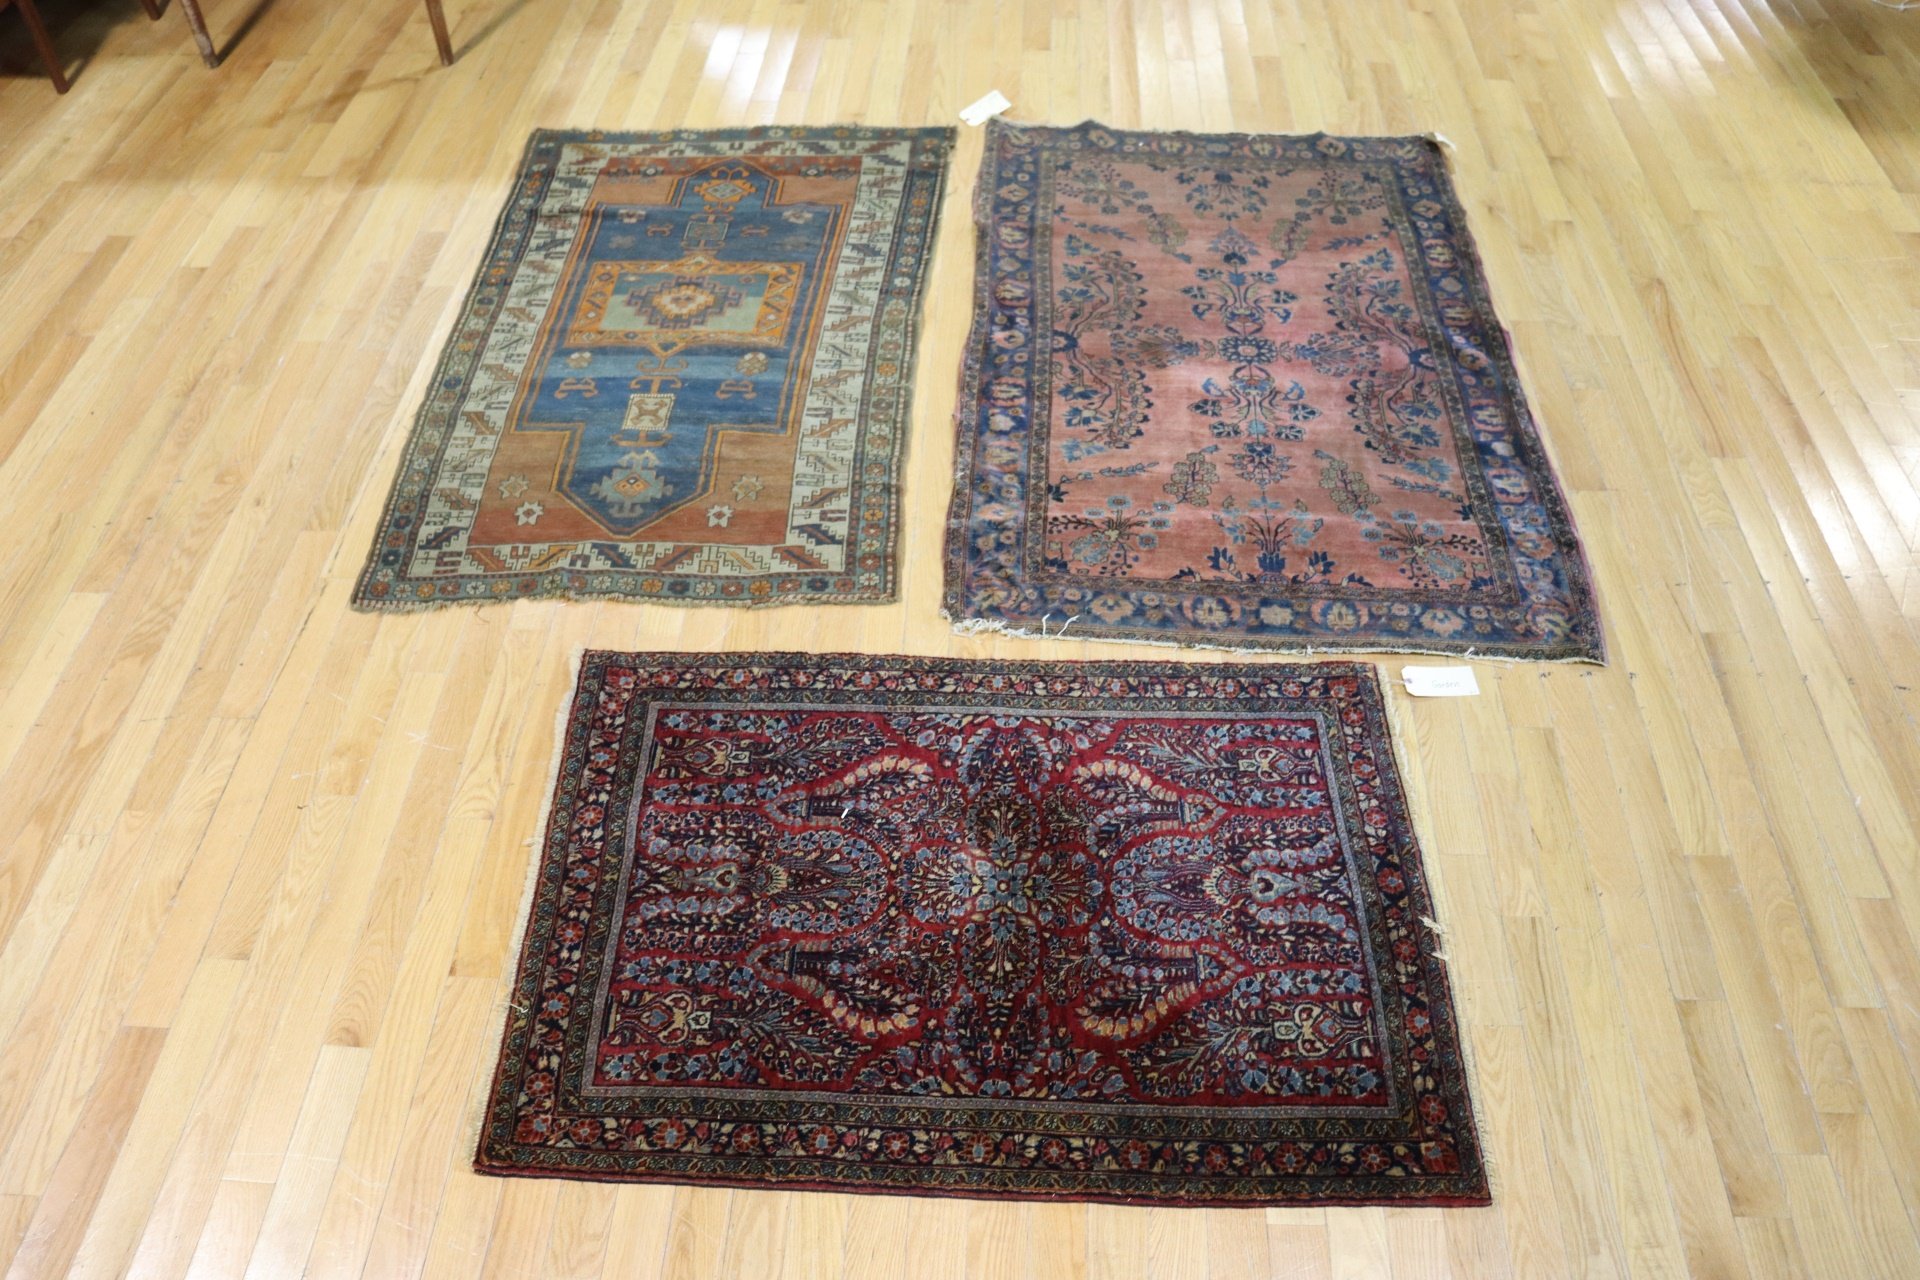 3 ANTIQUE AND FINELY HAND WOVEN 3b972a